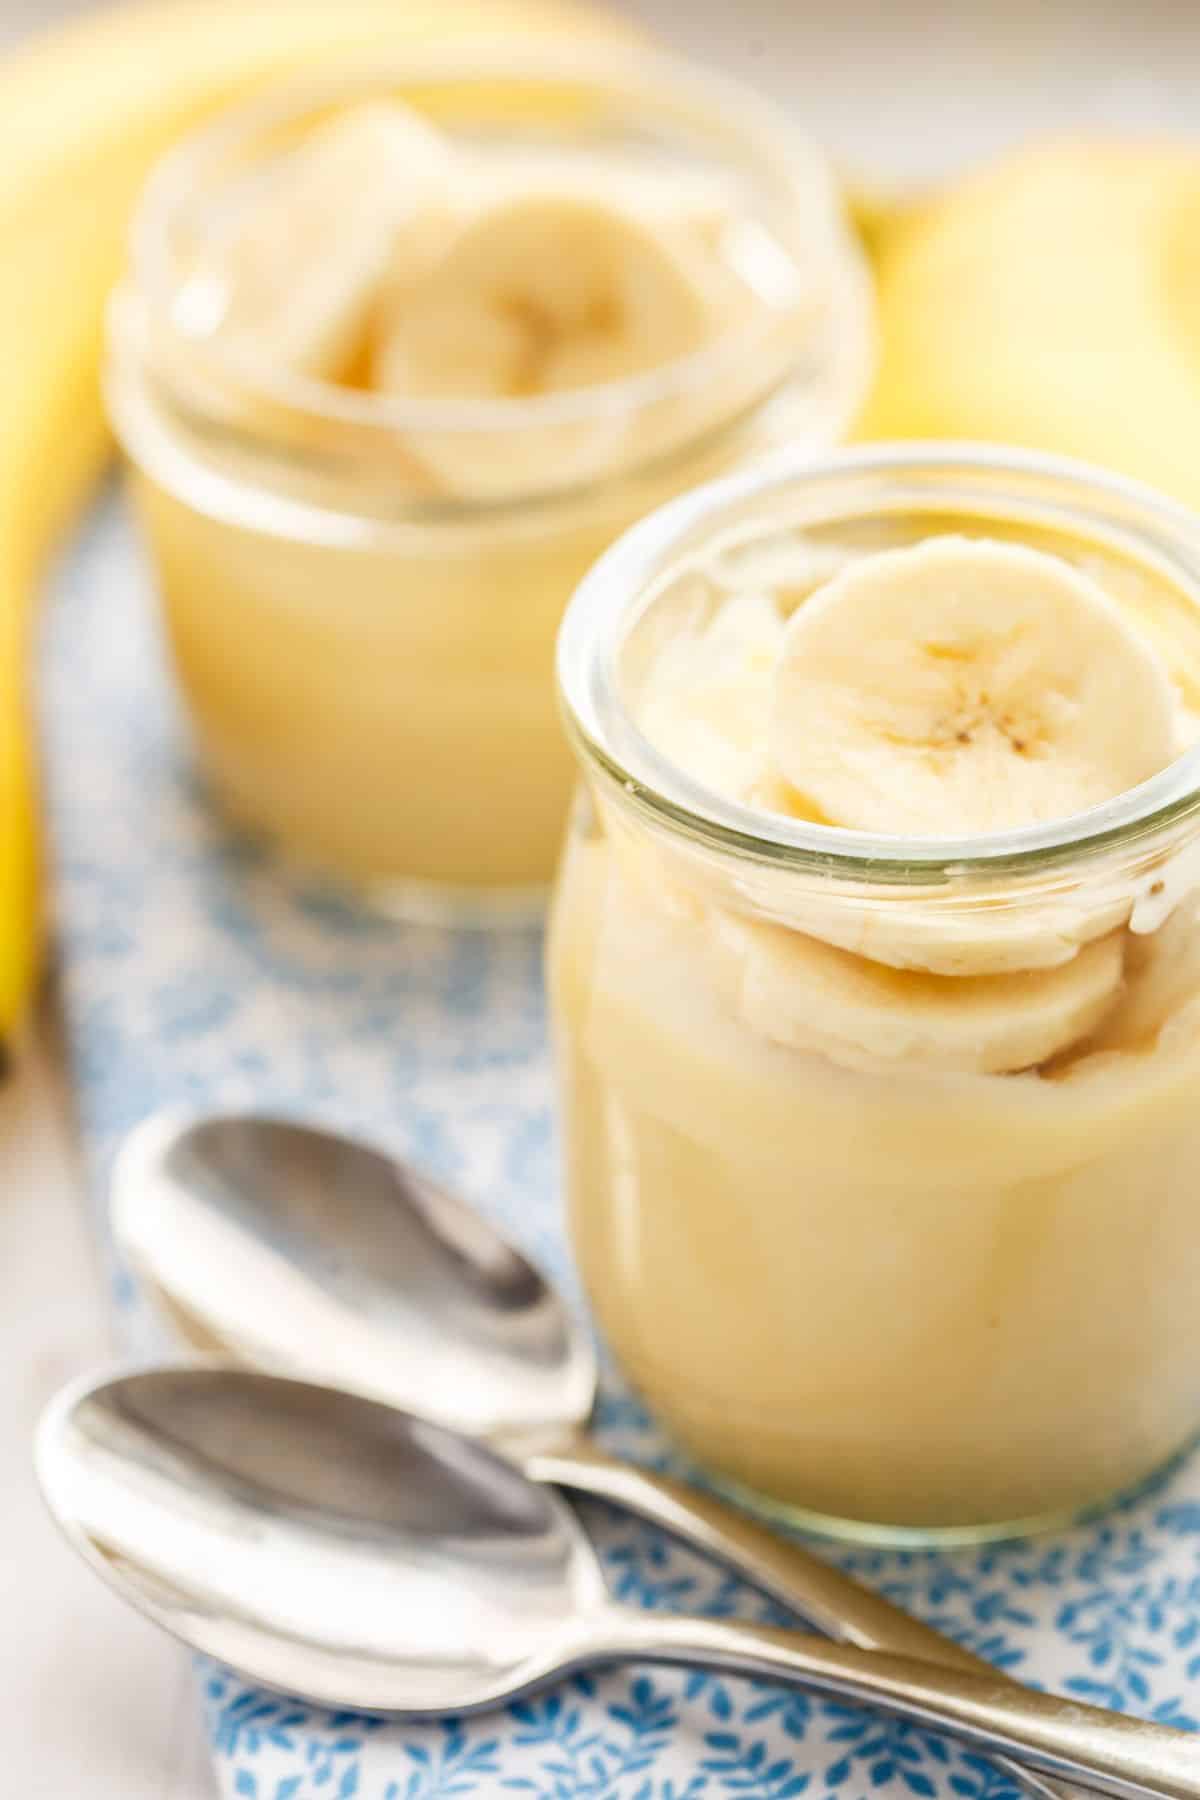 Dairy-free banana pudding in small jars on a striped towel.